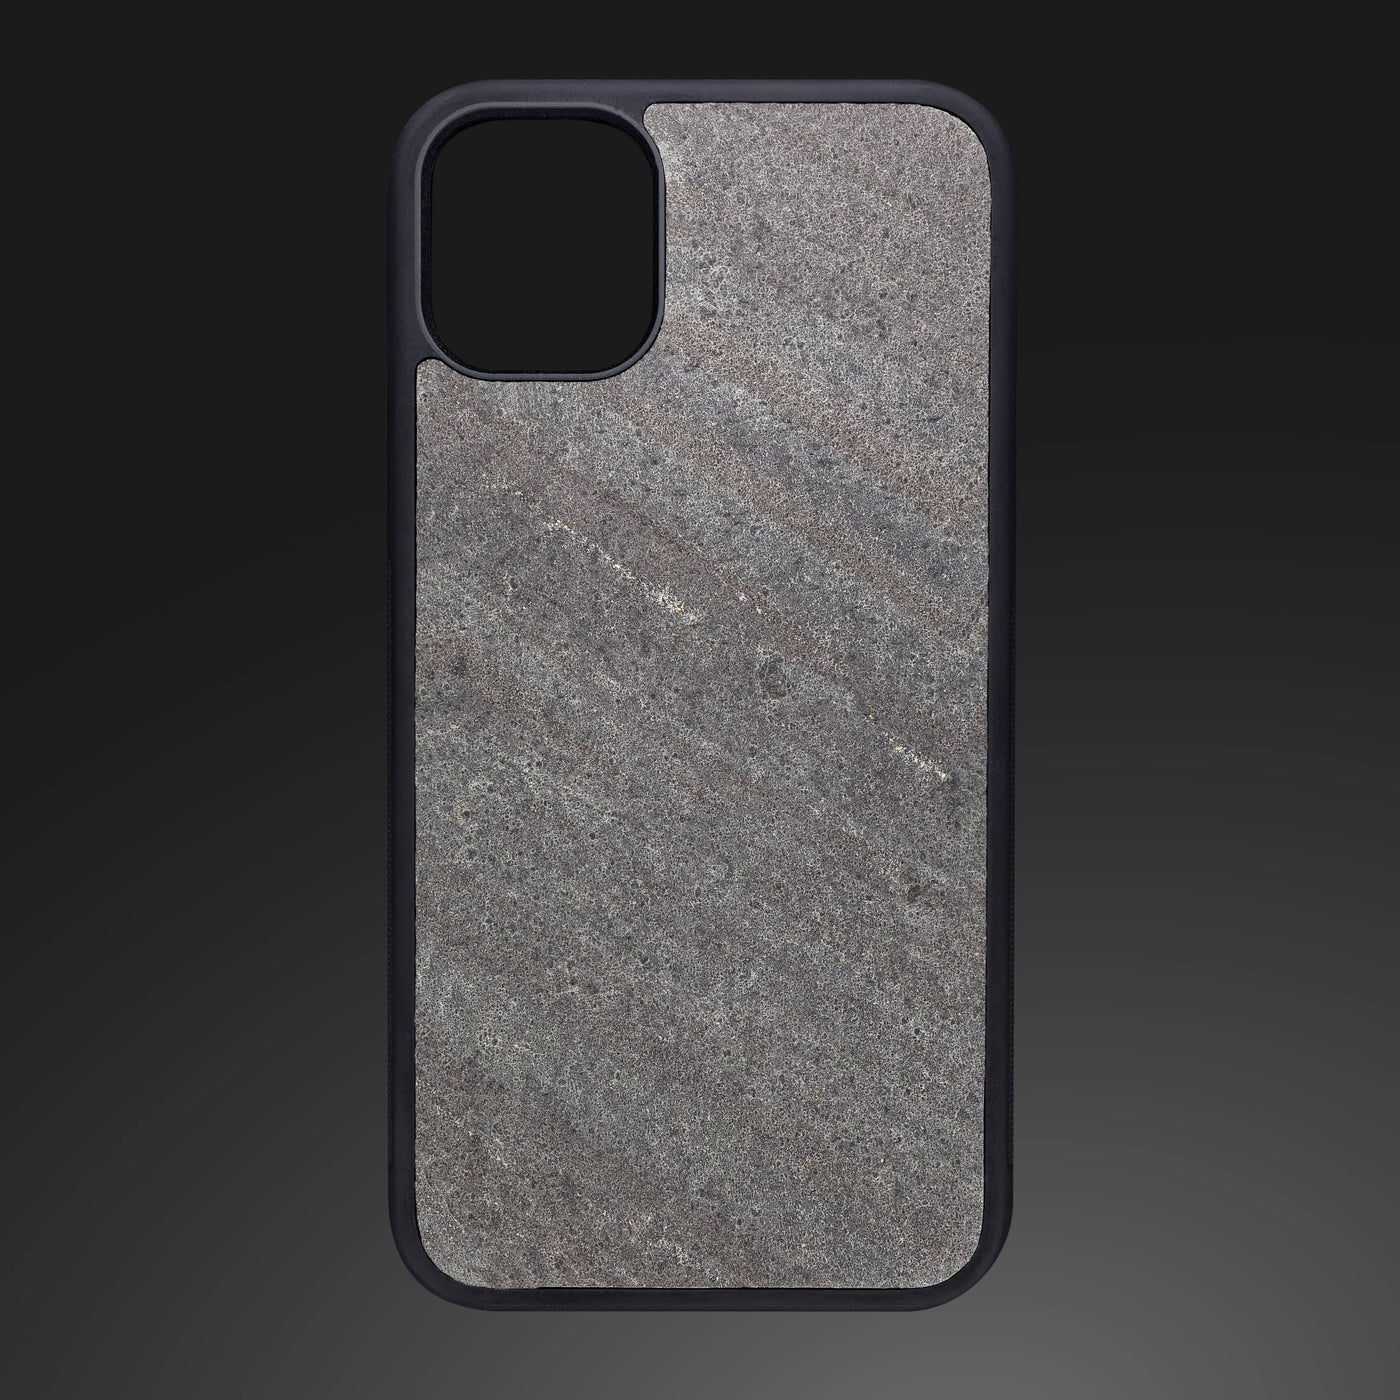 D Black Phone Case For iPhone 11 – Lite Stone